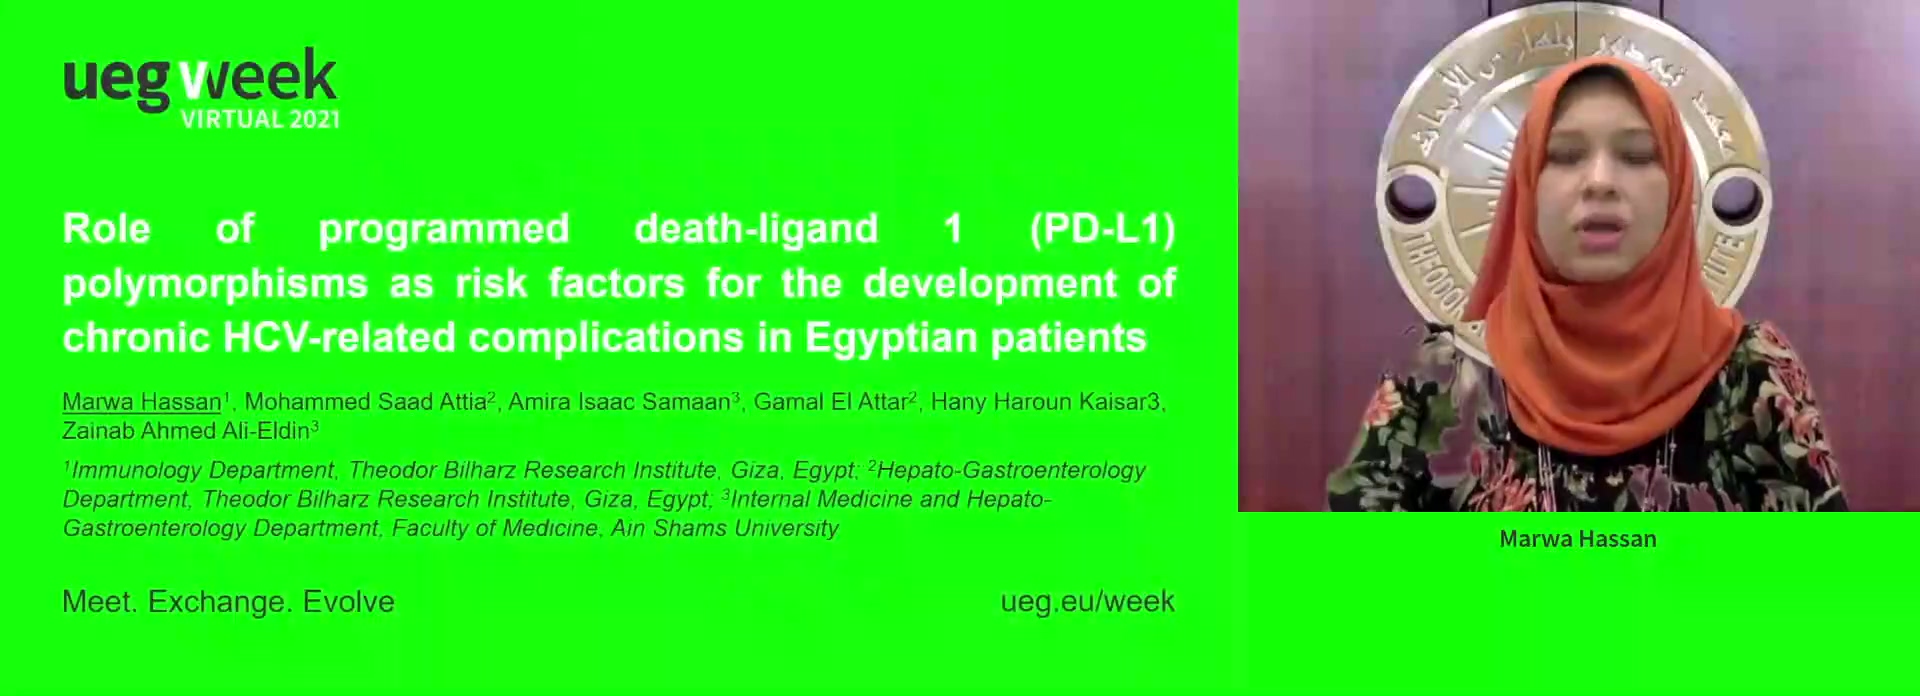 ROLE OF PROGRAMMED DEATH-LIGAND 1 (PD-L1) POLYMORPHISMS AS RISK FACTORS FOR THE DEVELOPMENT OF CHRONIC HCV-RELATED COMPLICATIONS IN EGYPTIAN POPULATION